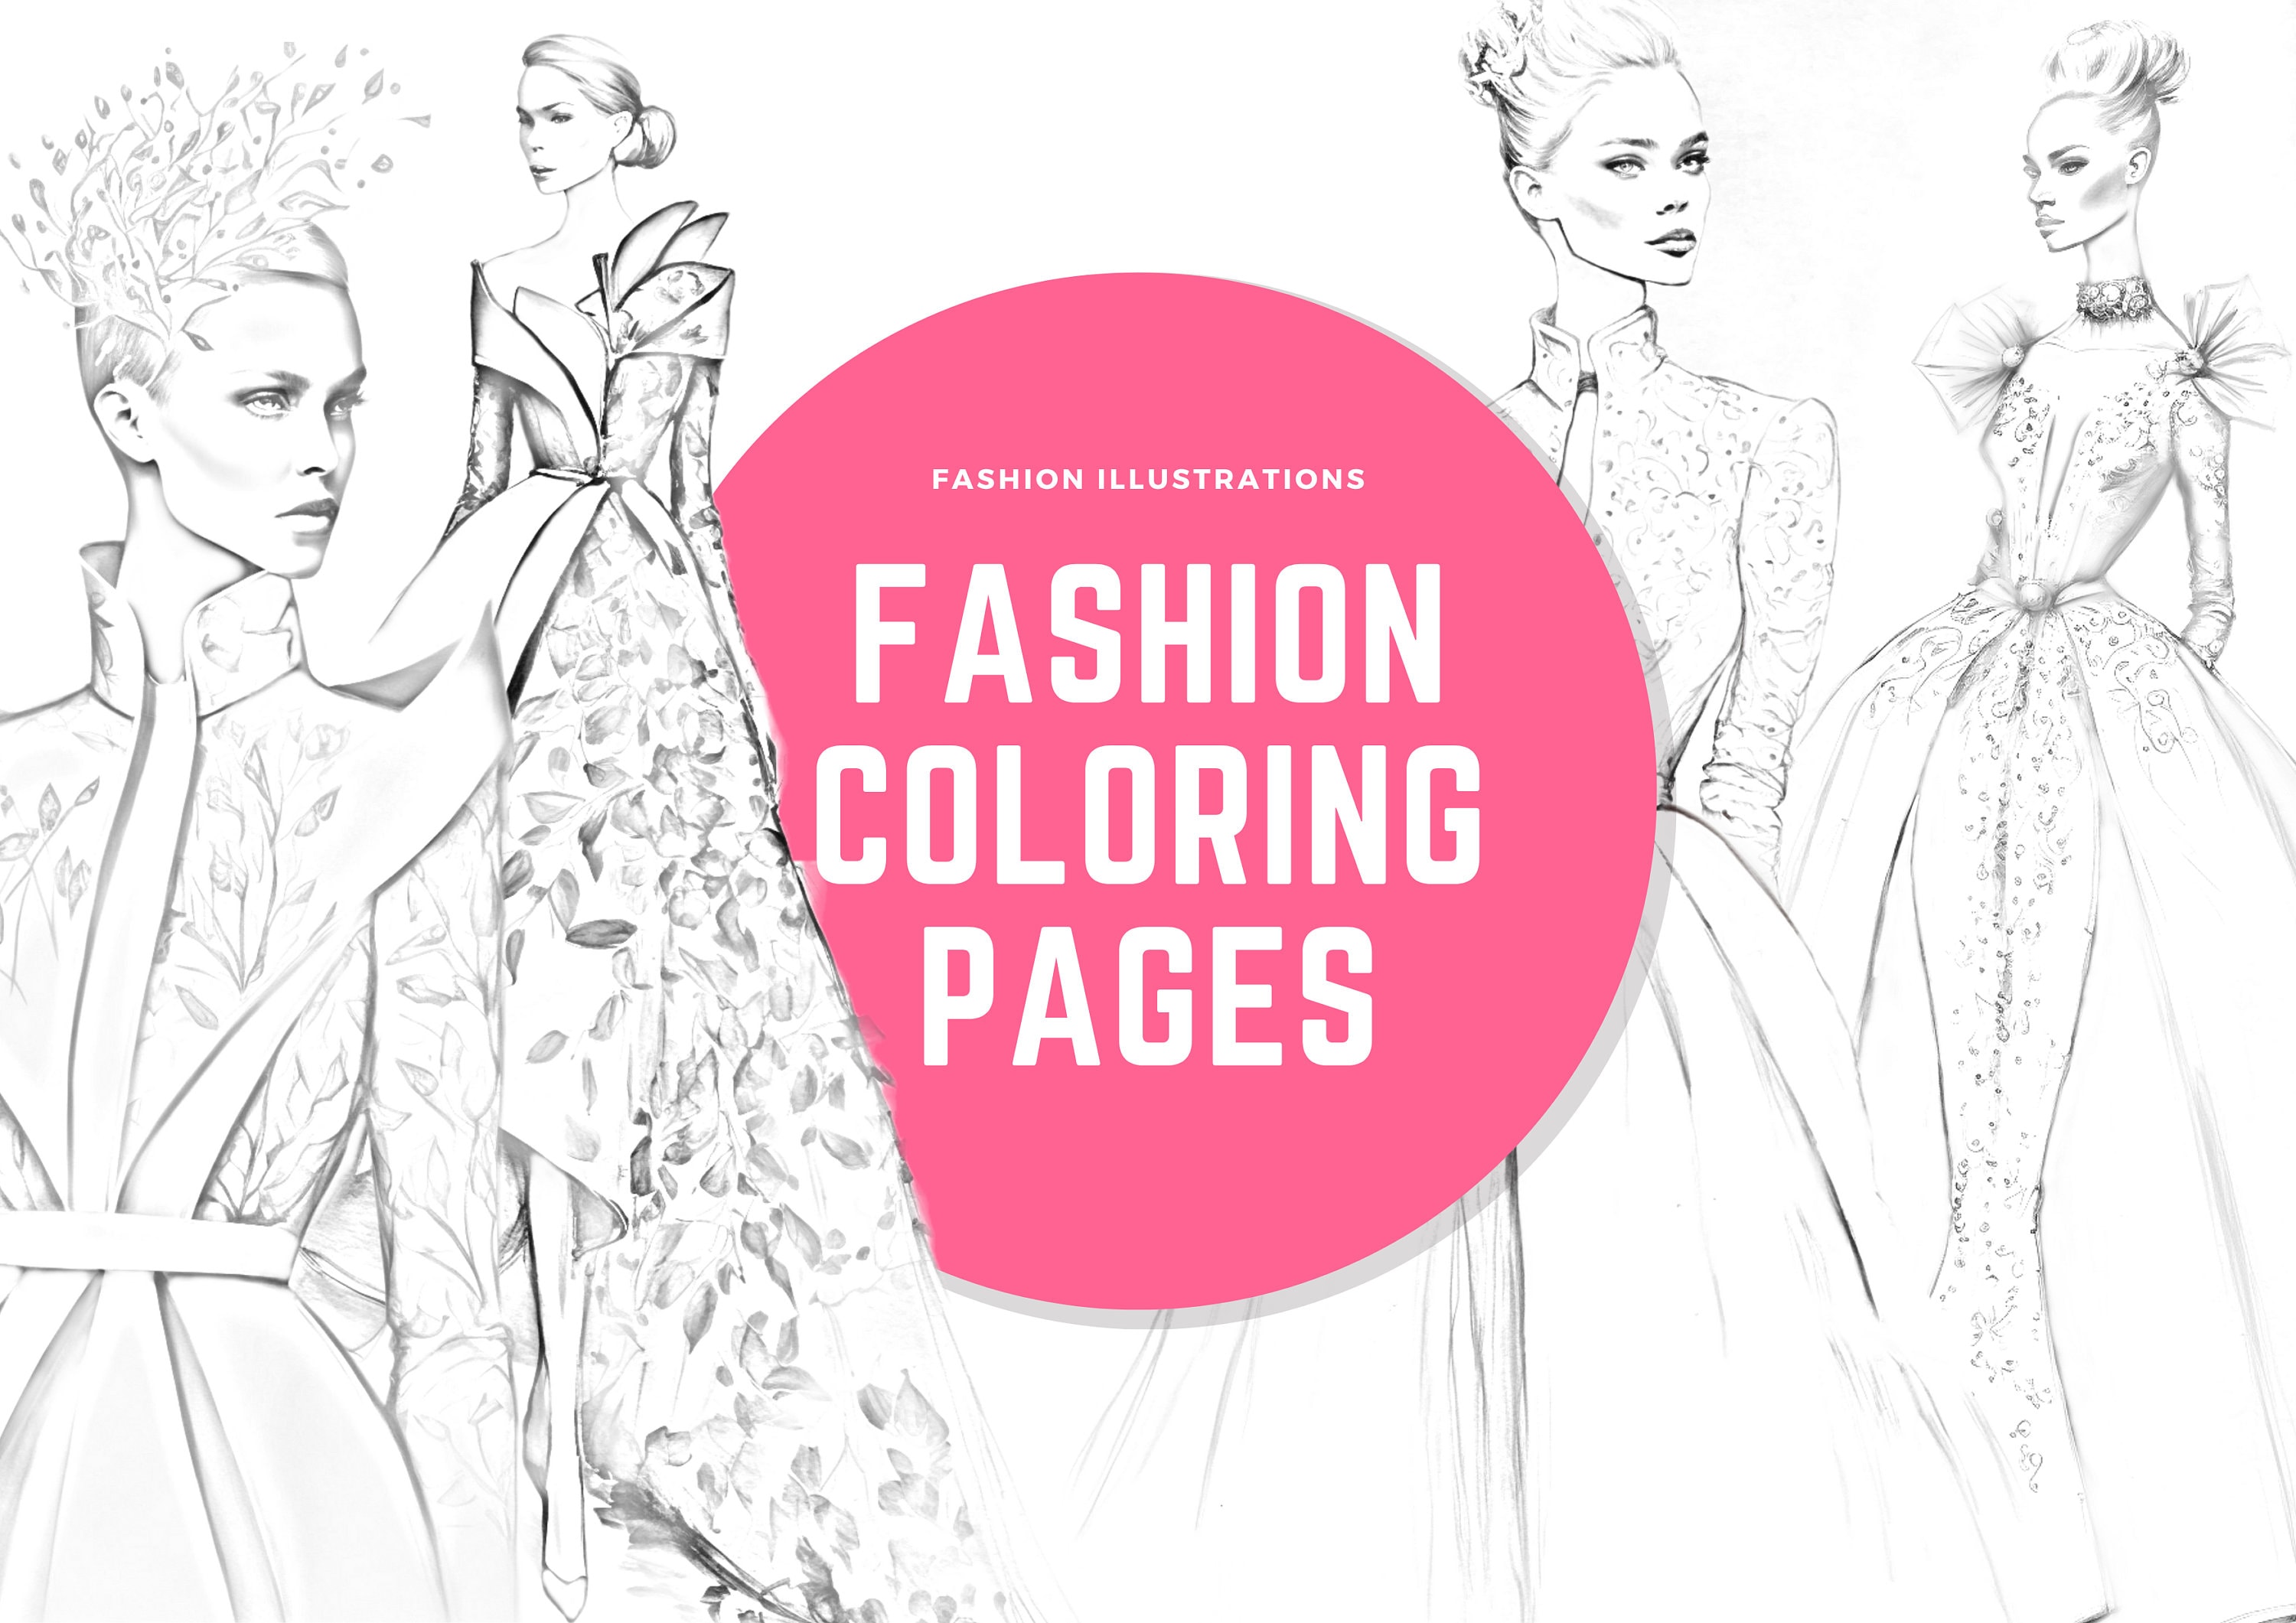 Vogue Fashion Coloring Book: Fashion Illustrations Collection with Creative and Inspirational Designs for Teens, Adults Relaxation and Stress Relief